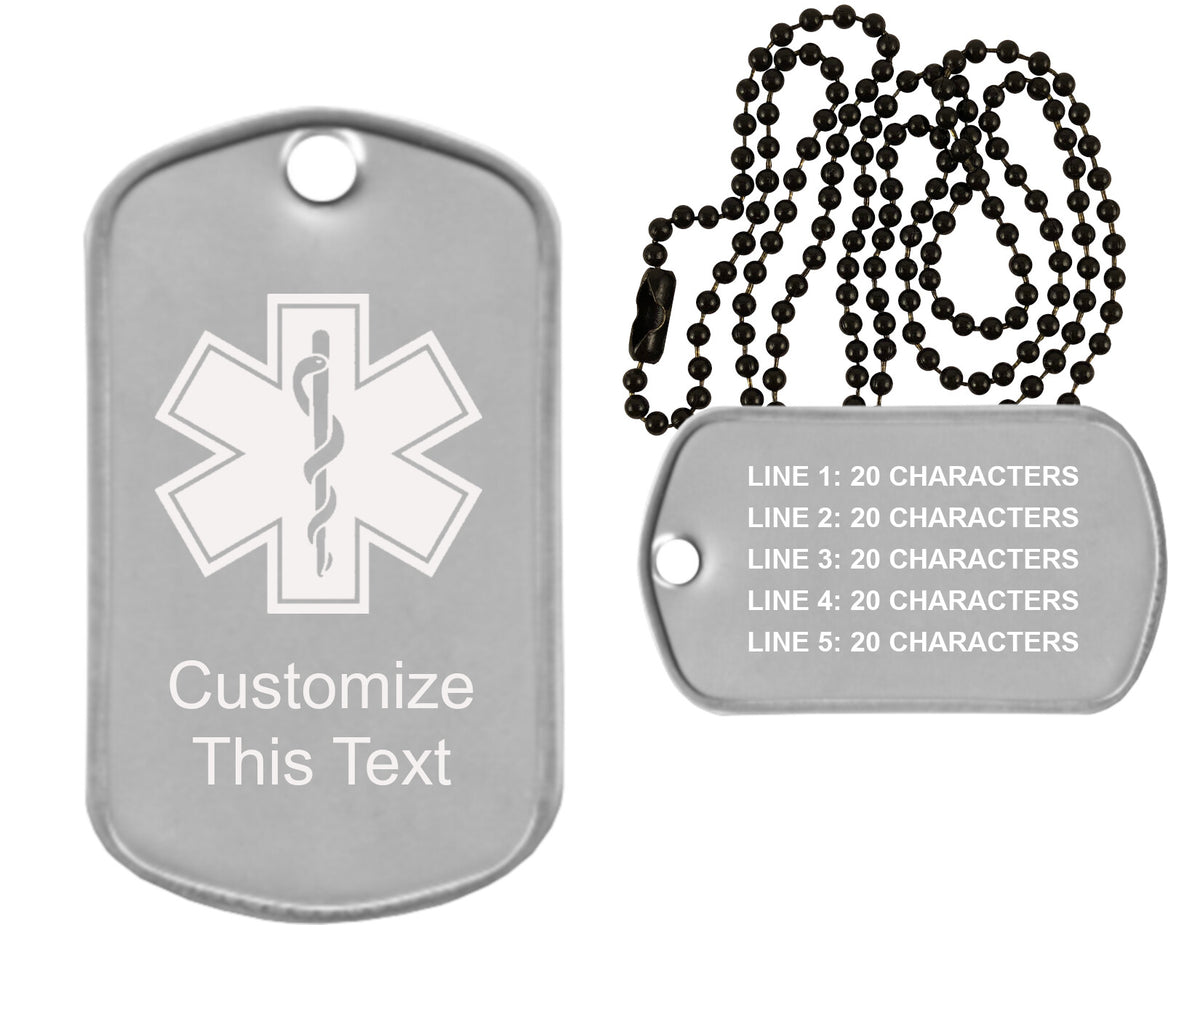 Unicorn Medic Alert Dog Tag Necklace in Silver and Magic